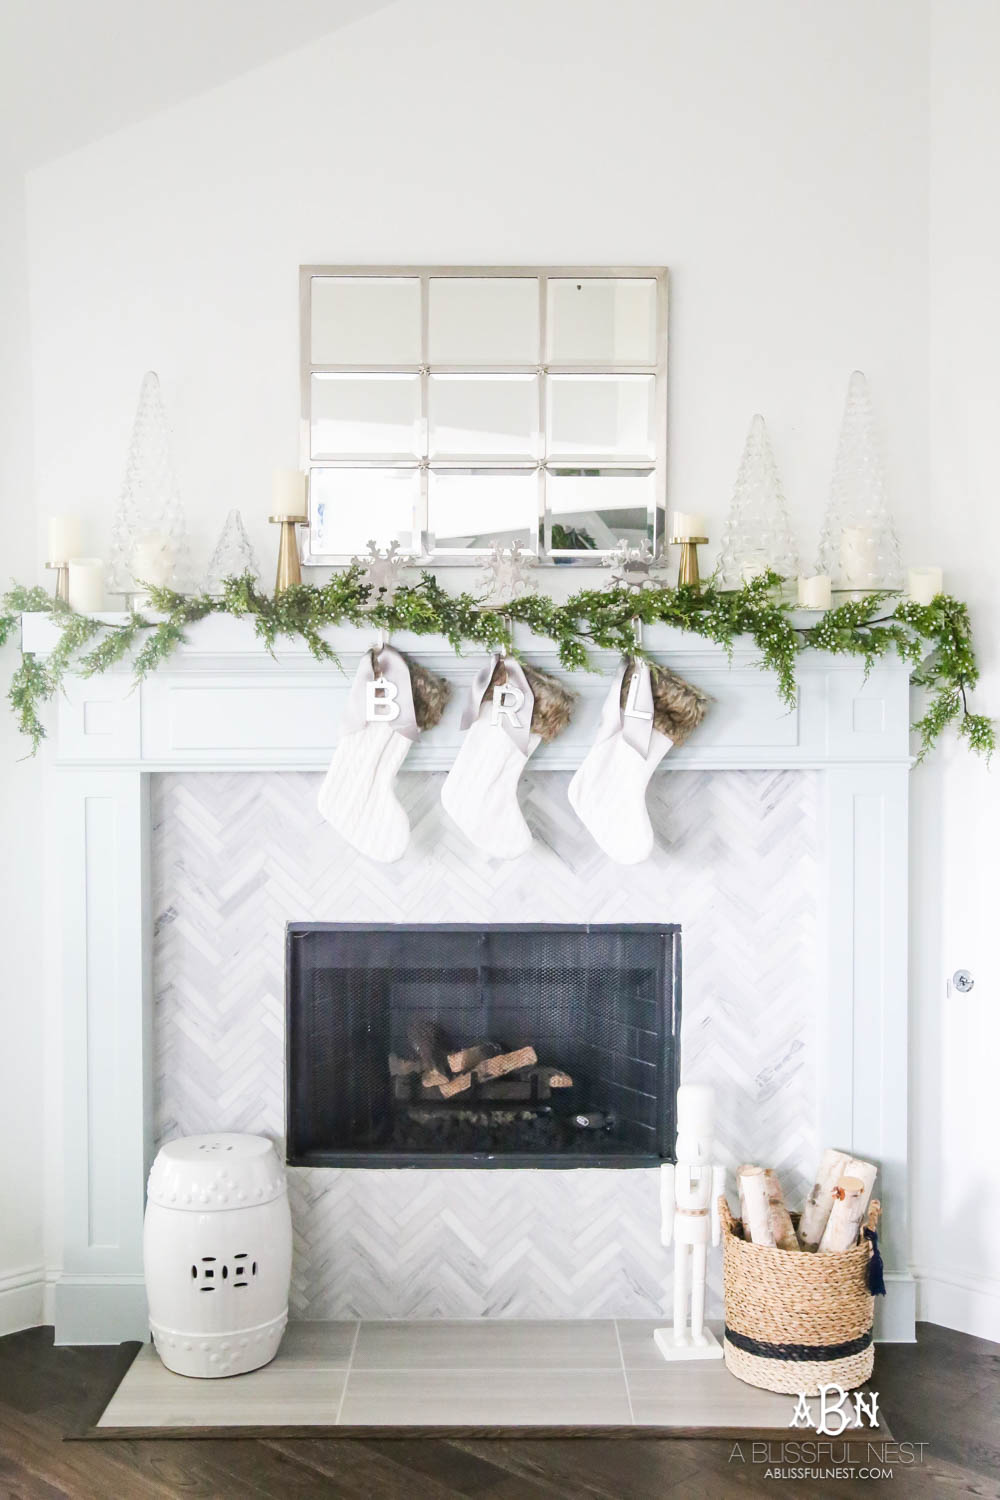 Gorgeous blue and silver Christmas mantle décor with juniper berry garland and glass hurricane Christmas trees. Simple and festive holiday décor in this open concept living space. Check out all the white, silver and gold Christmas decor in this holiday home tour on ABlissfulNest.com. #ABlissfulNest #Christmasdecor #Christmasdecorating #CoastalChristmasdecor #christmastree #christmasmantle